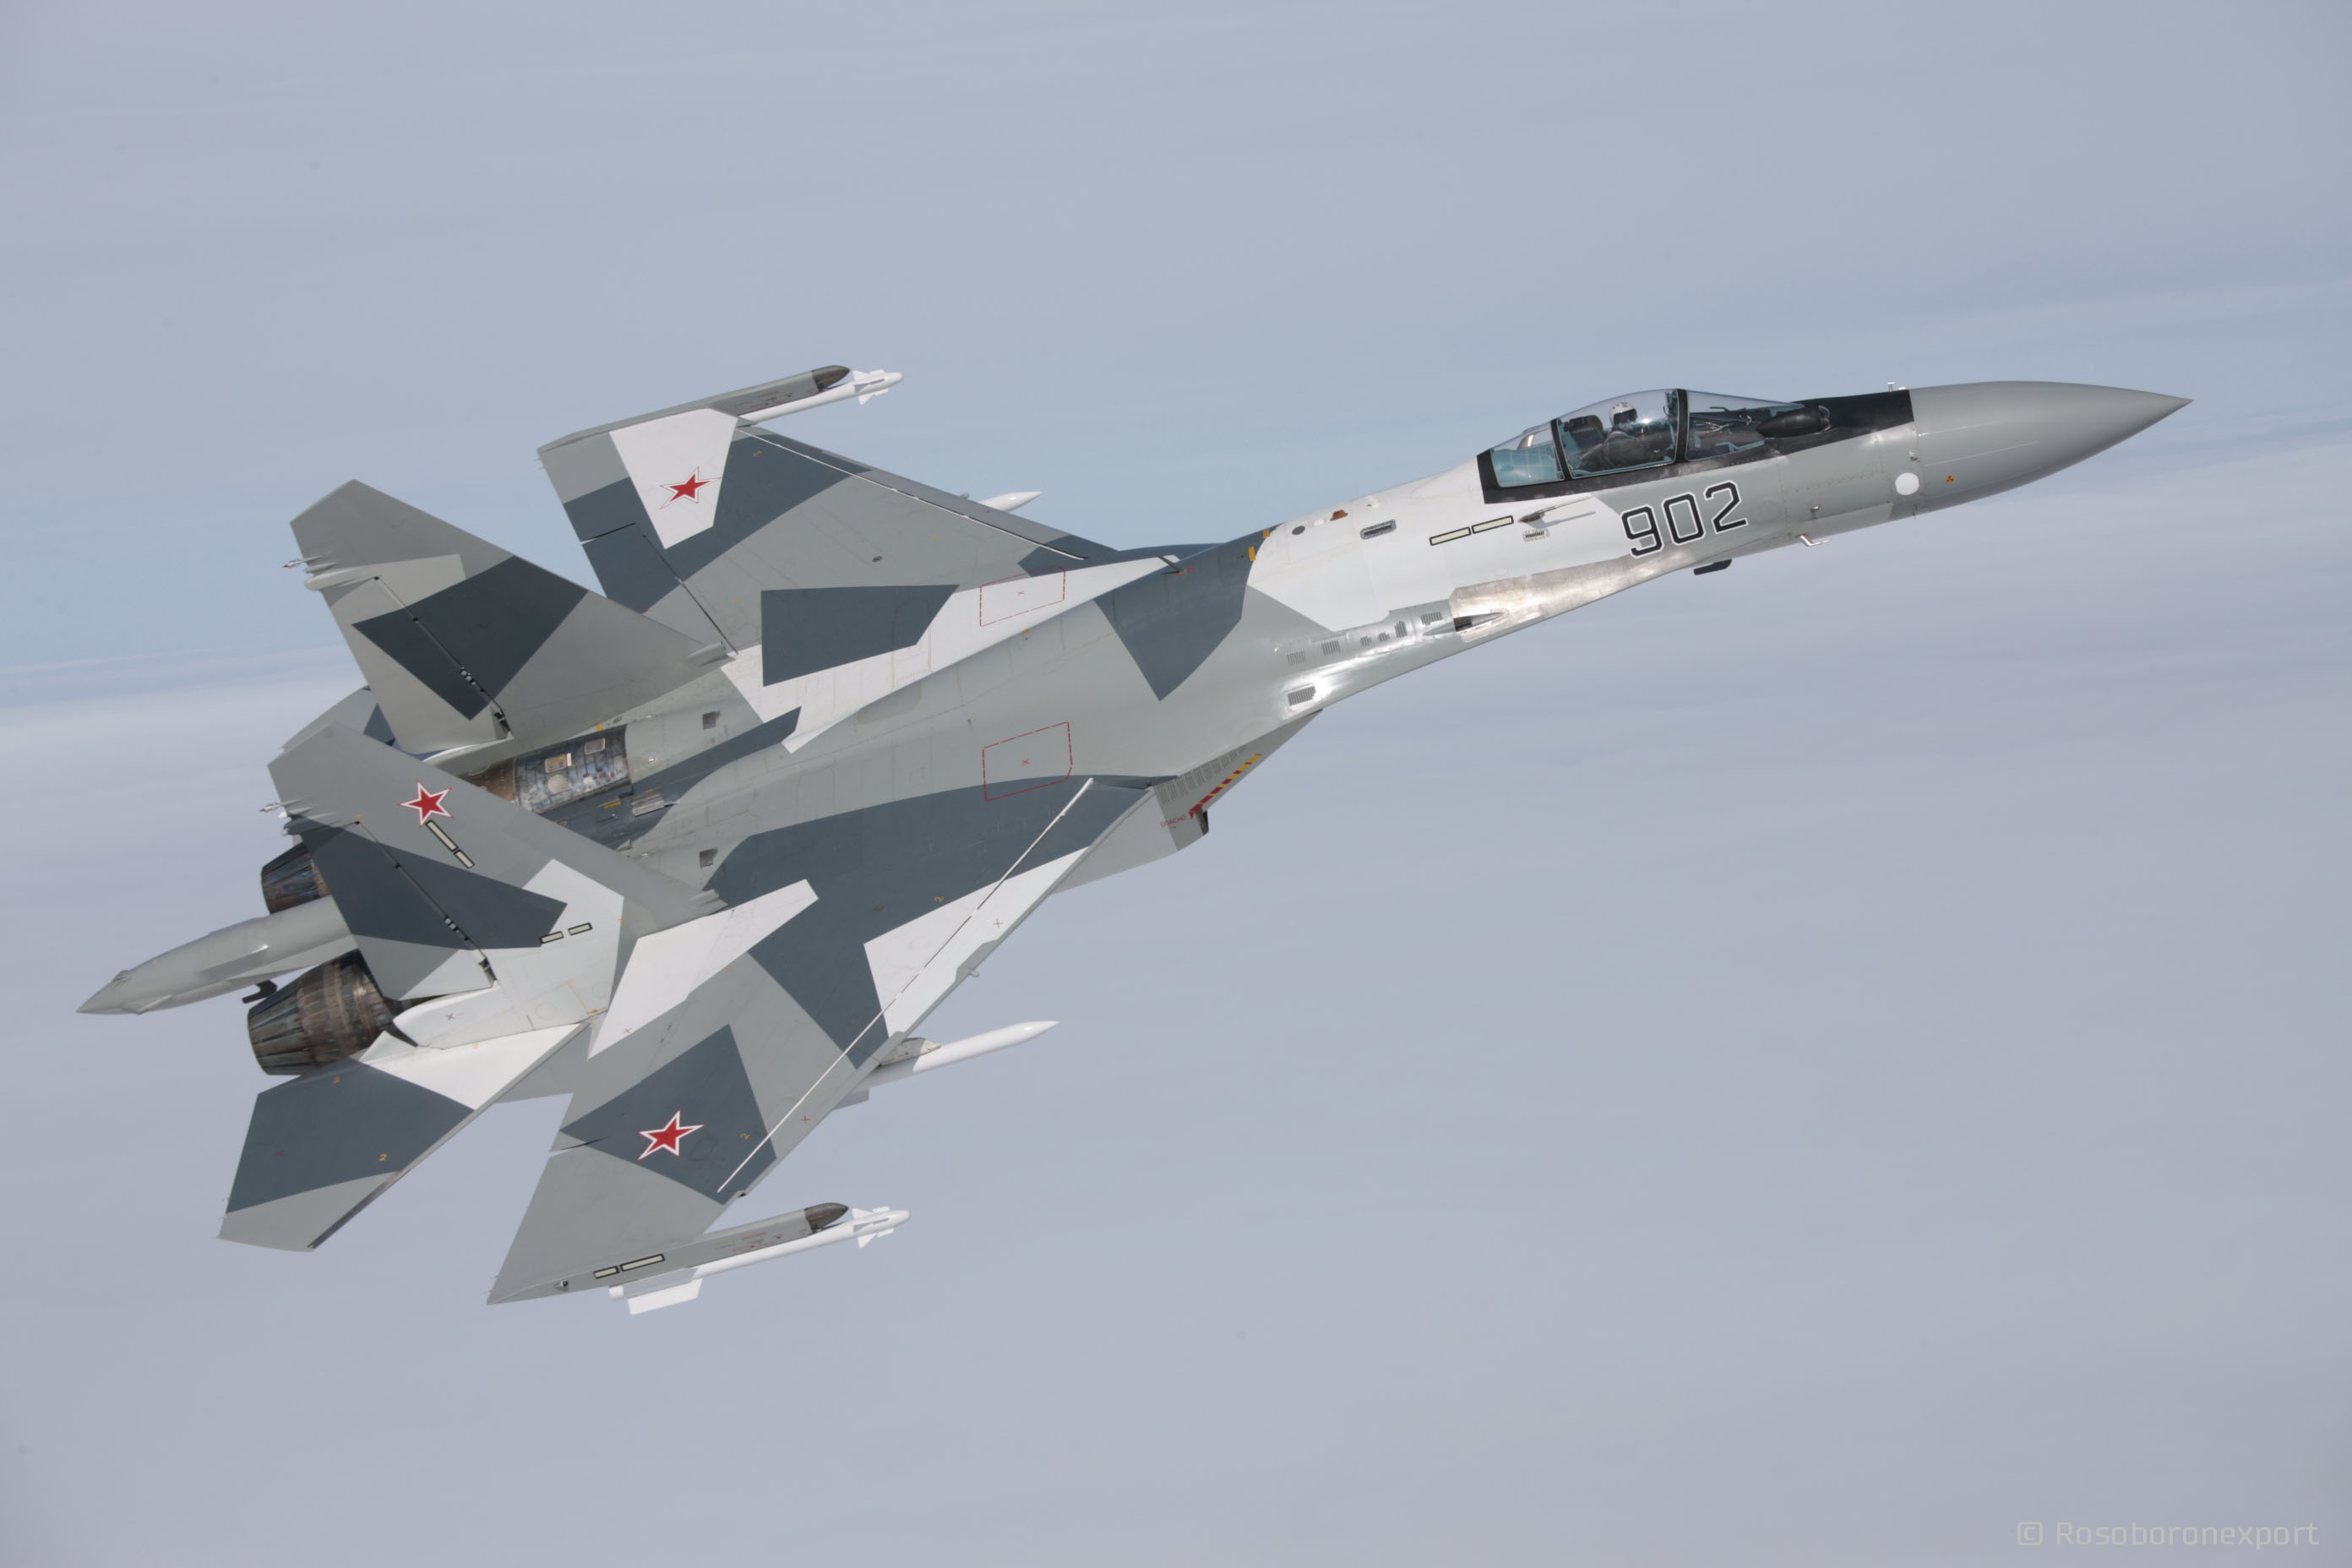 The Armed Forces of Ukraine have destroyed two squadrons of advanced Russian Su-35 fighters worth $1-1.5 billion